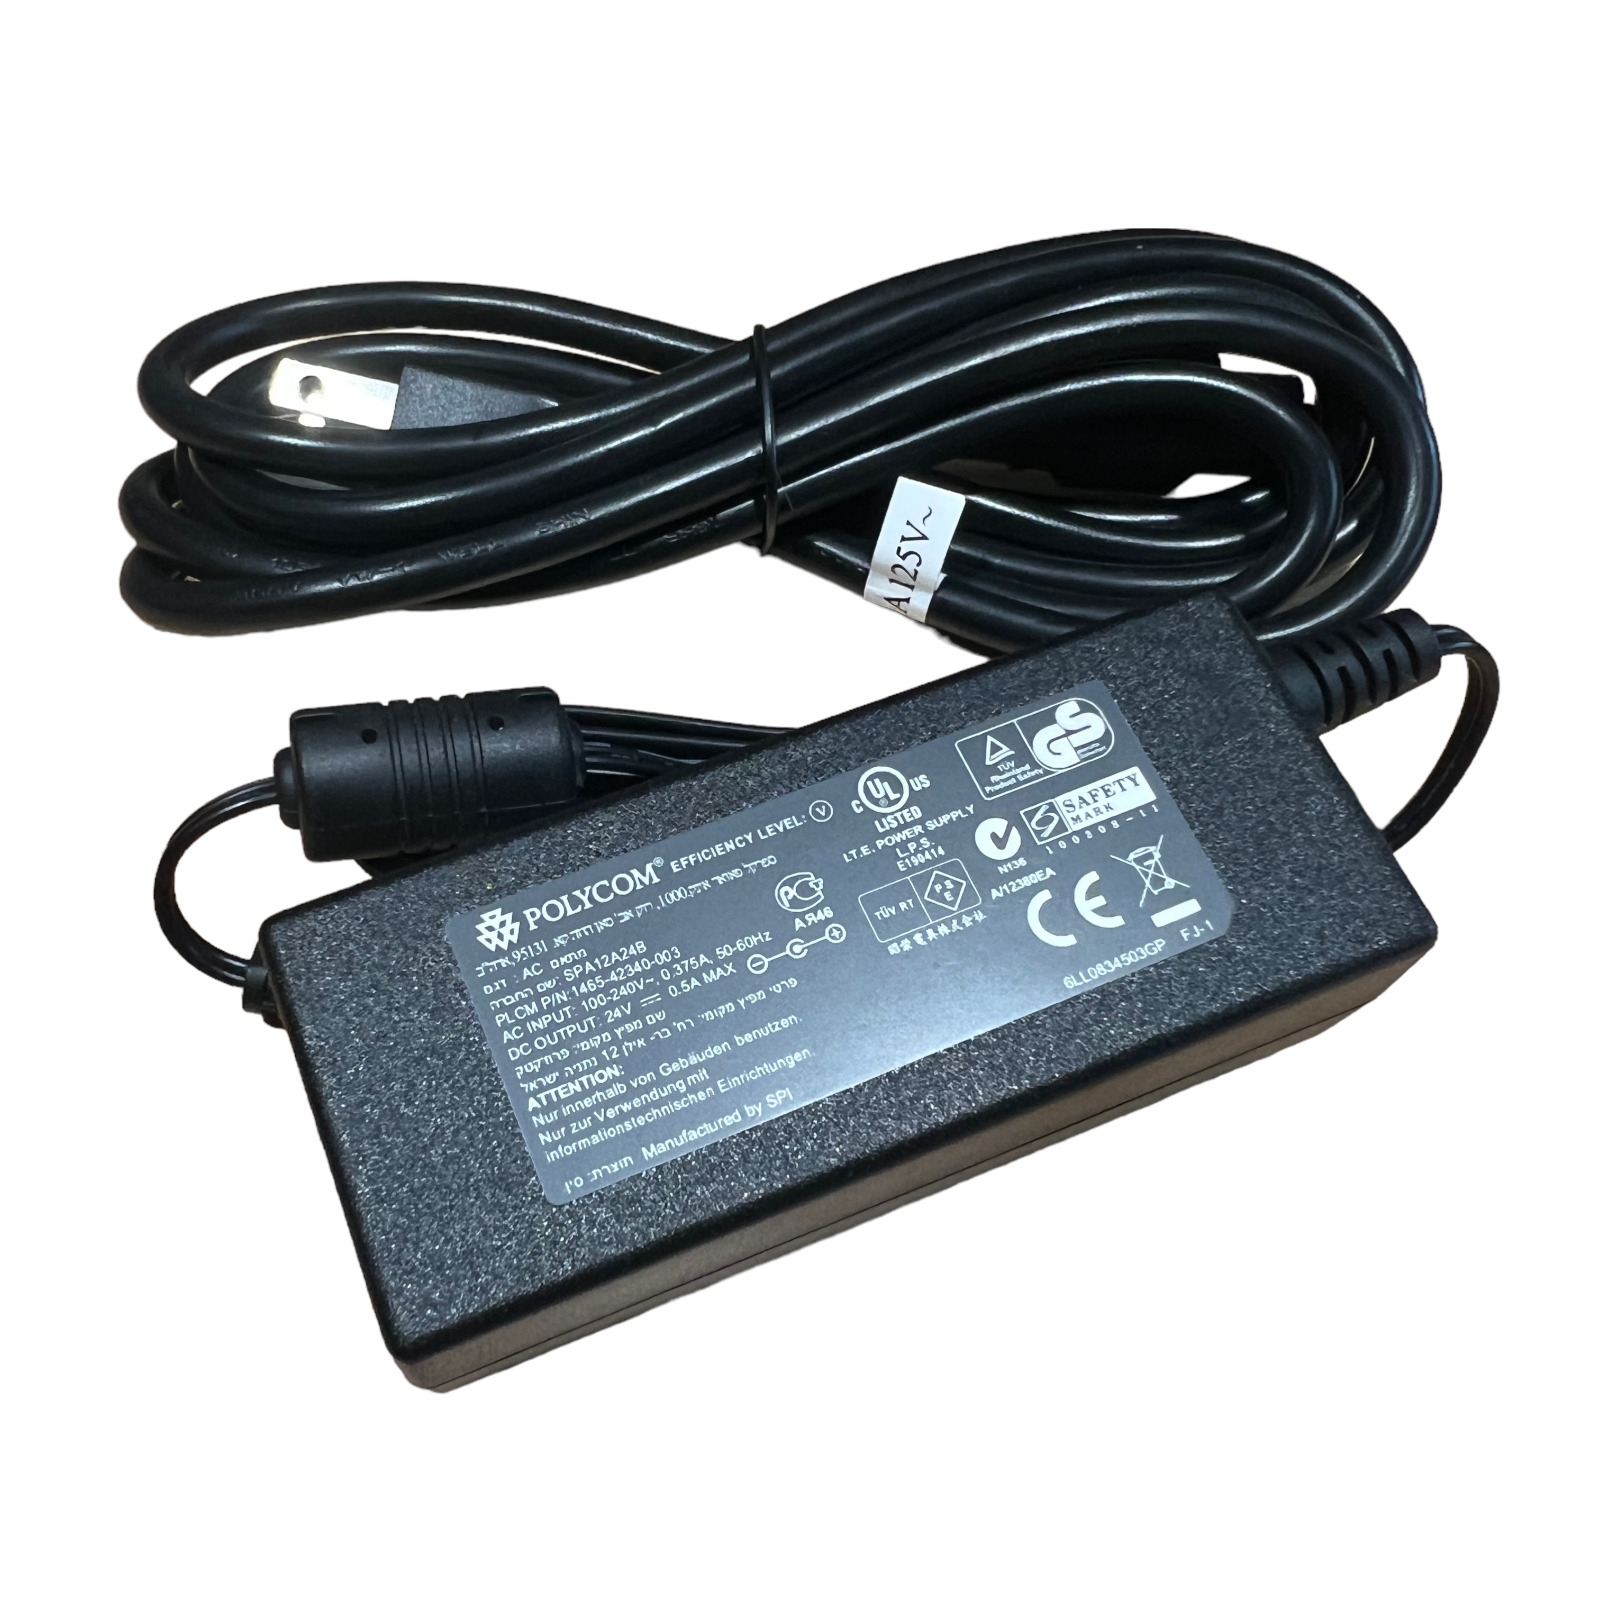 NEW Polycom AC Power Adapter Charger 24V 0.5A Black SPA12A24B FOR CX500 CX600